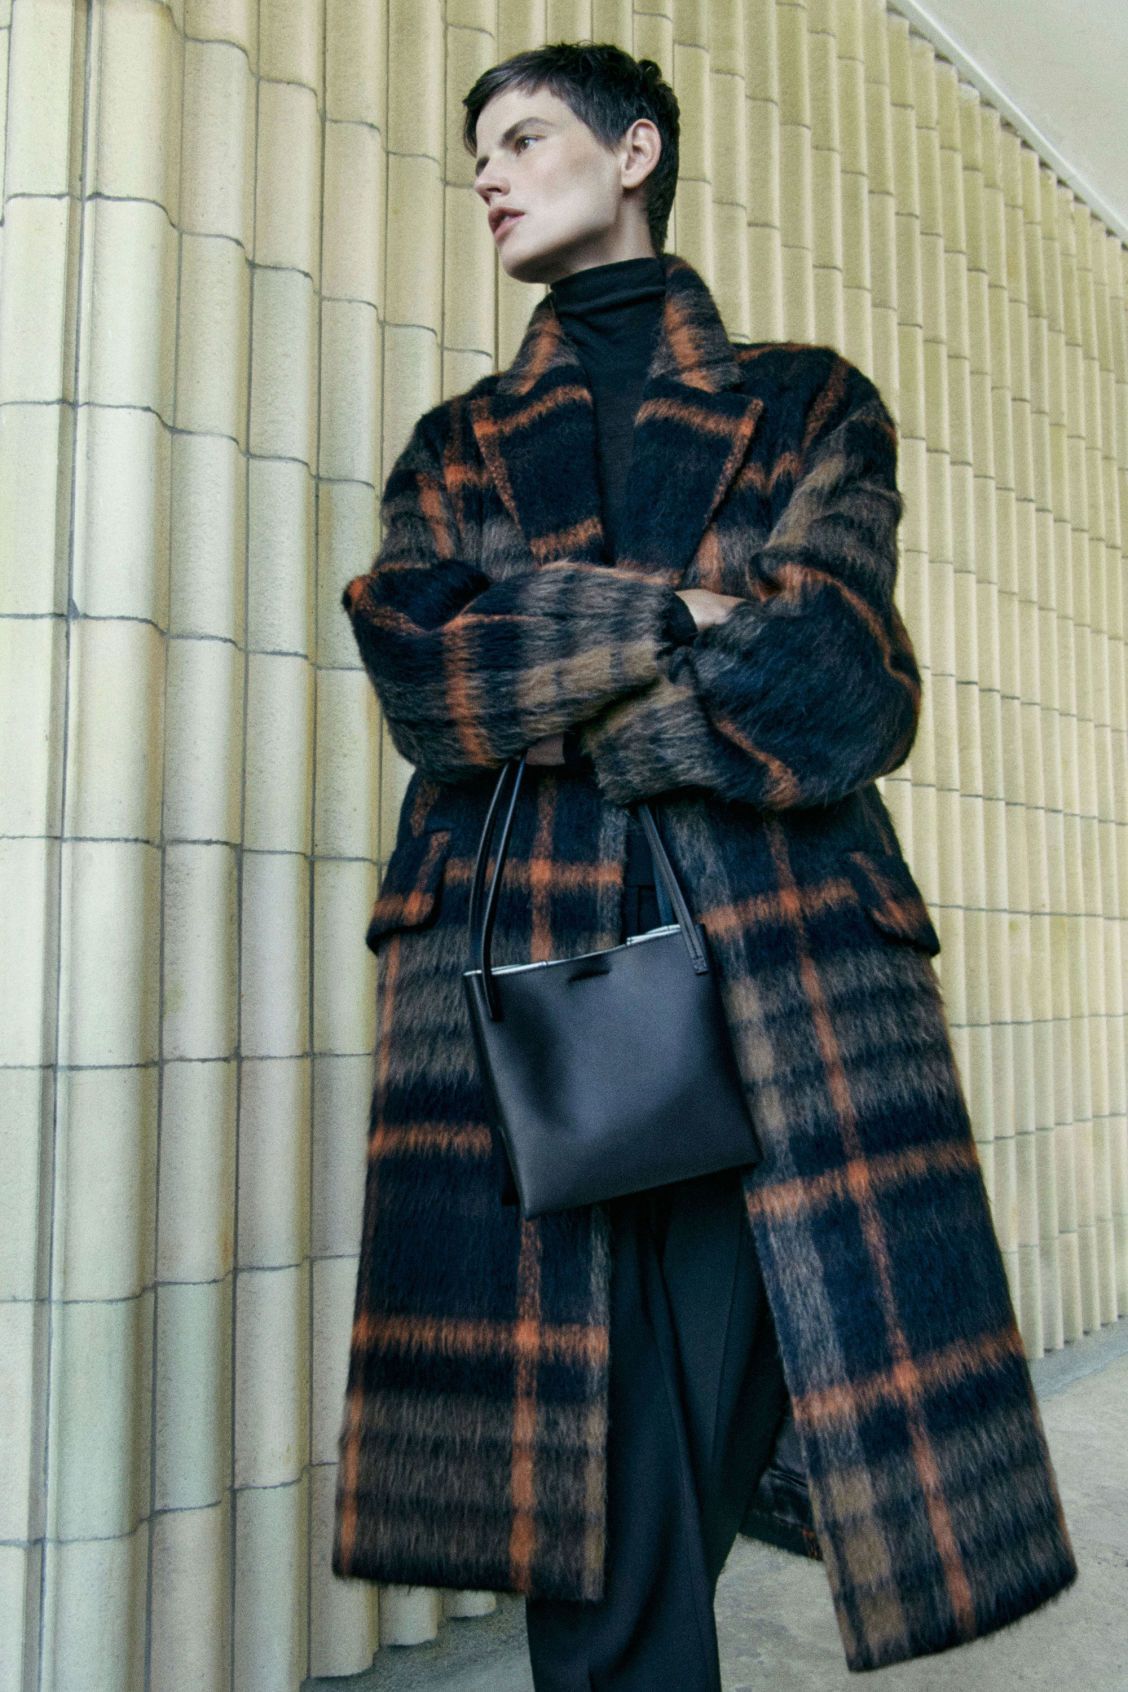 How to Style Plaid Wool Coat: Best 15 Must-Try Outfit Ideas for Women